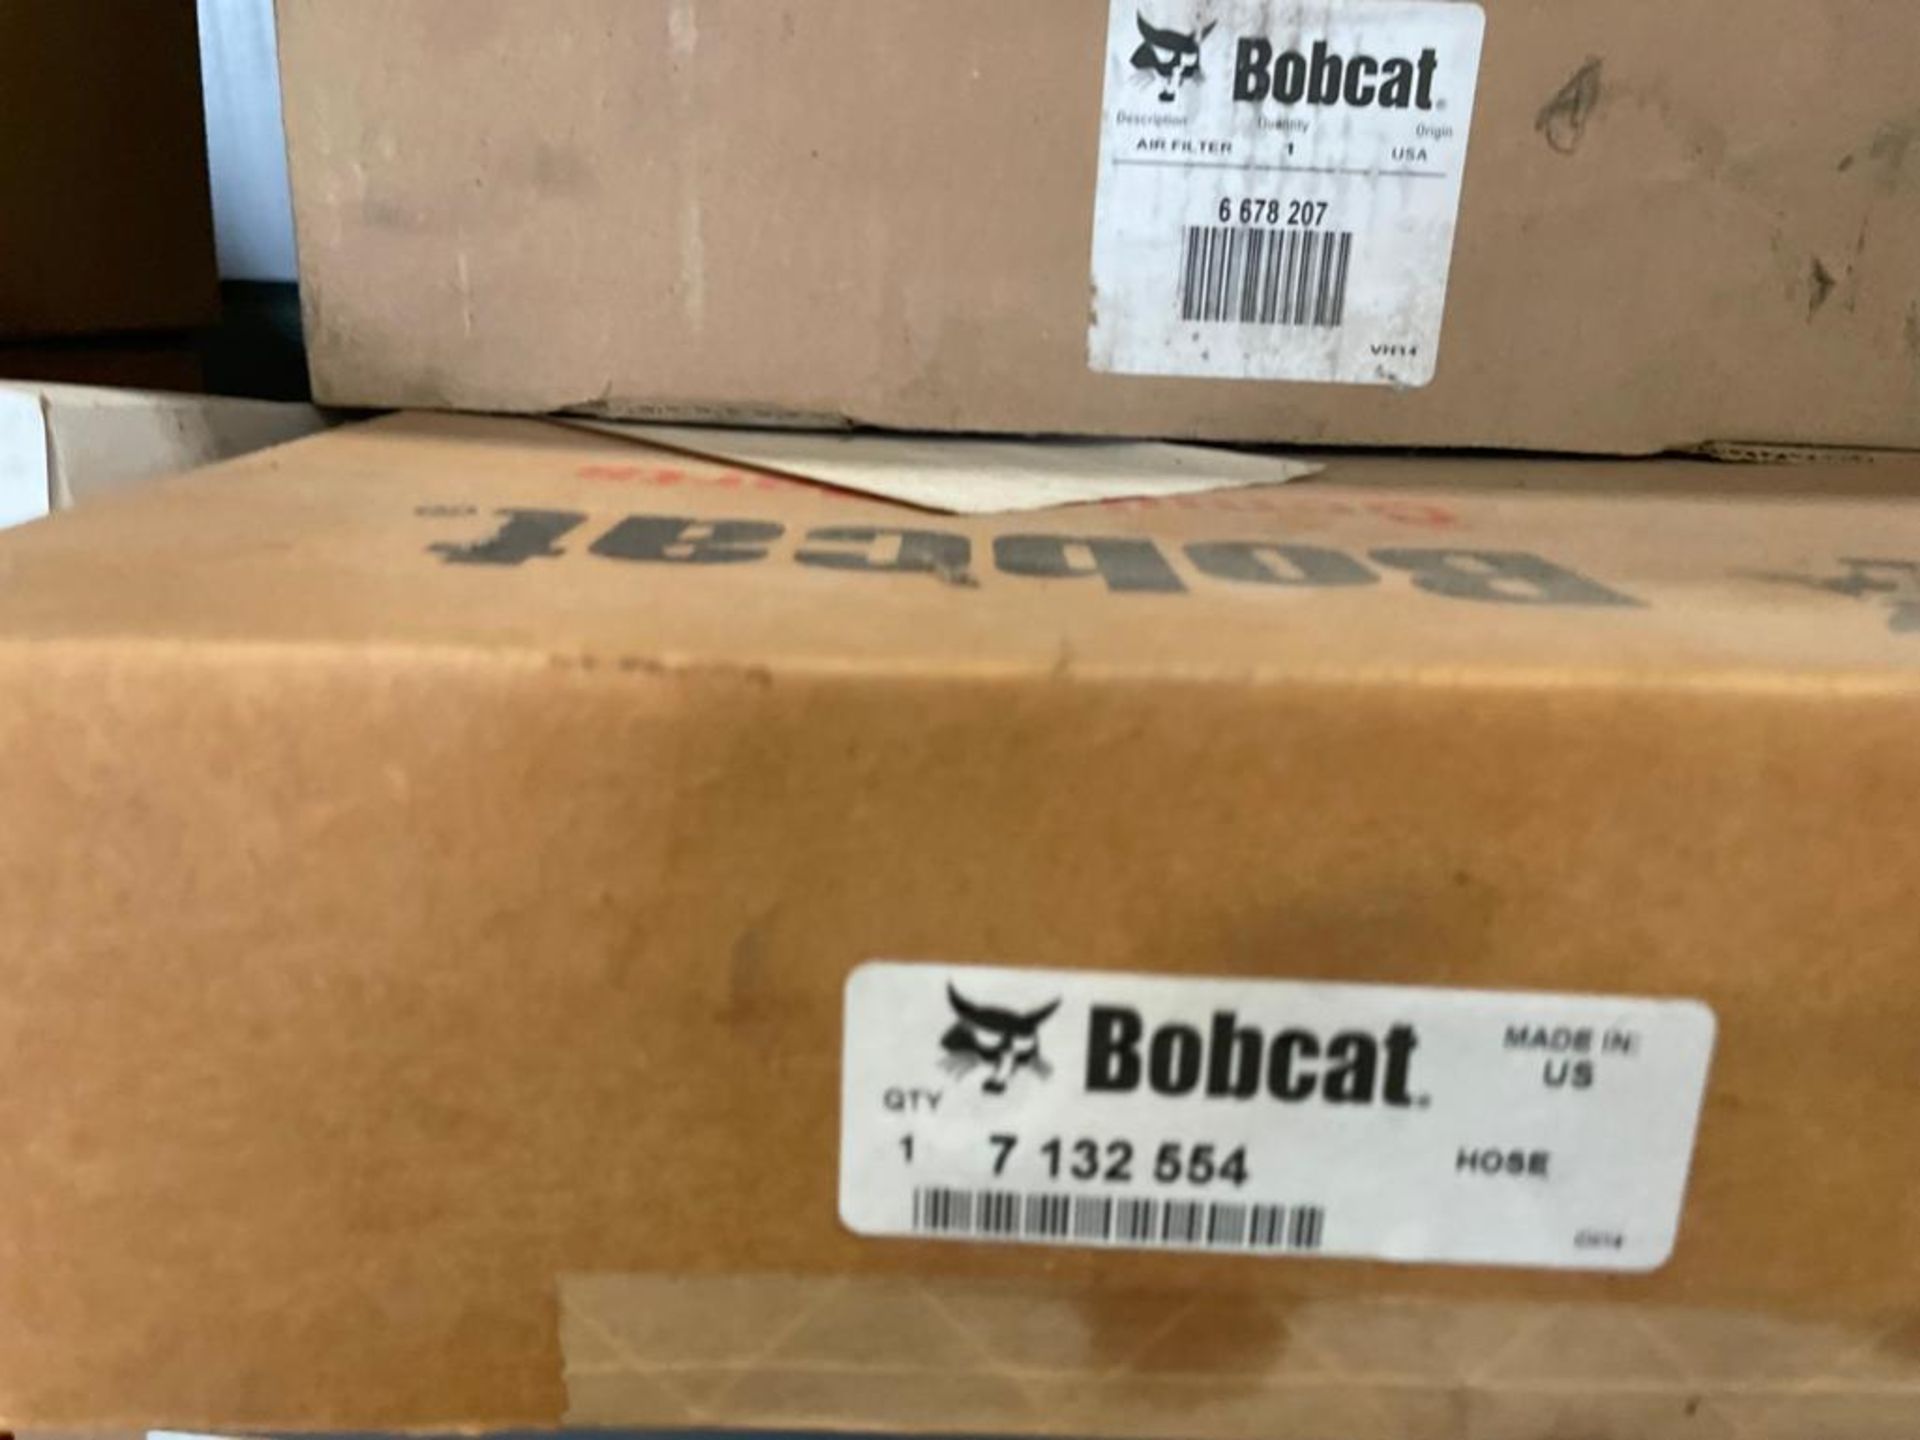 Two Shelves of Miscellaneous New Bobcat Parts, Oil Filter, Hyd Filter, Lube Filter, Air Filter, Hose - Image 9 of 13